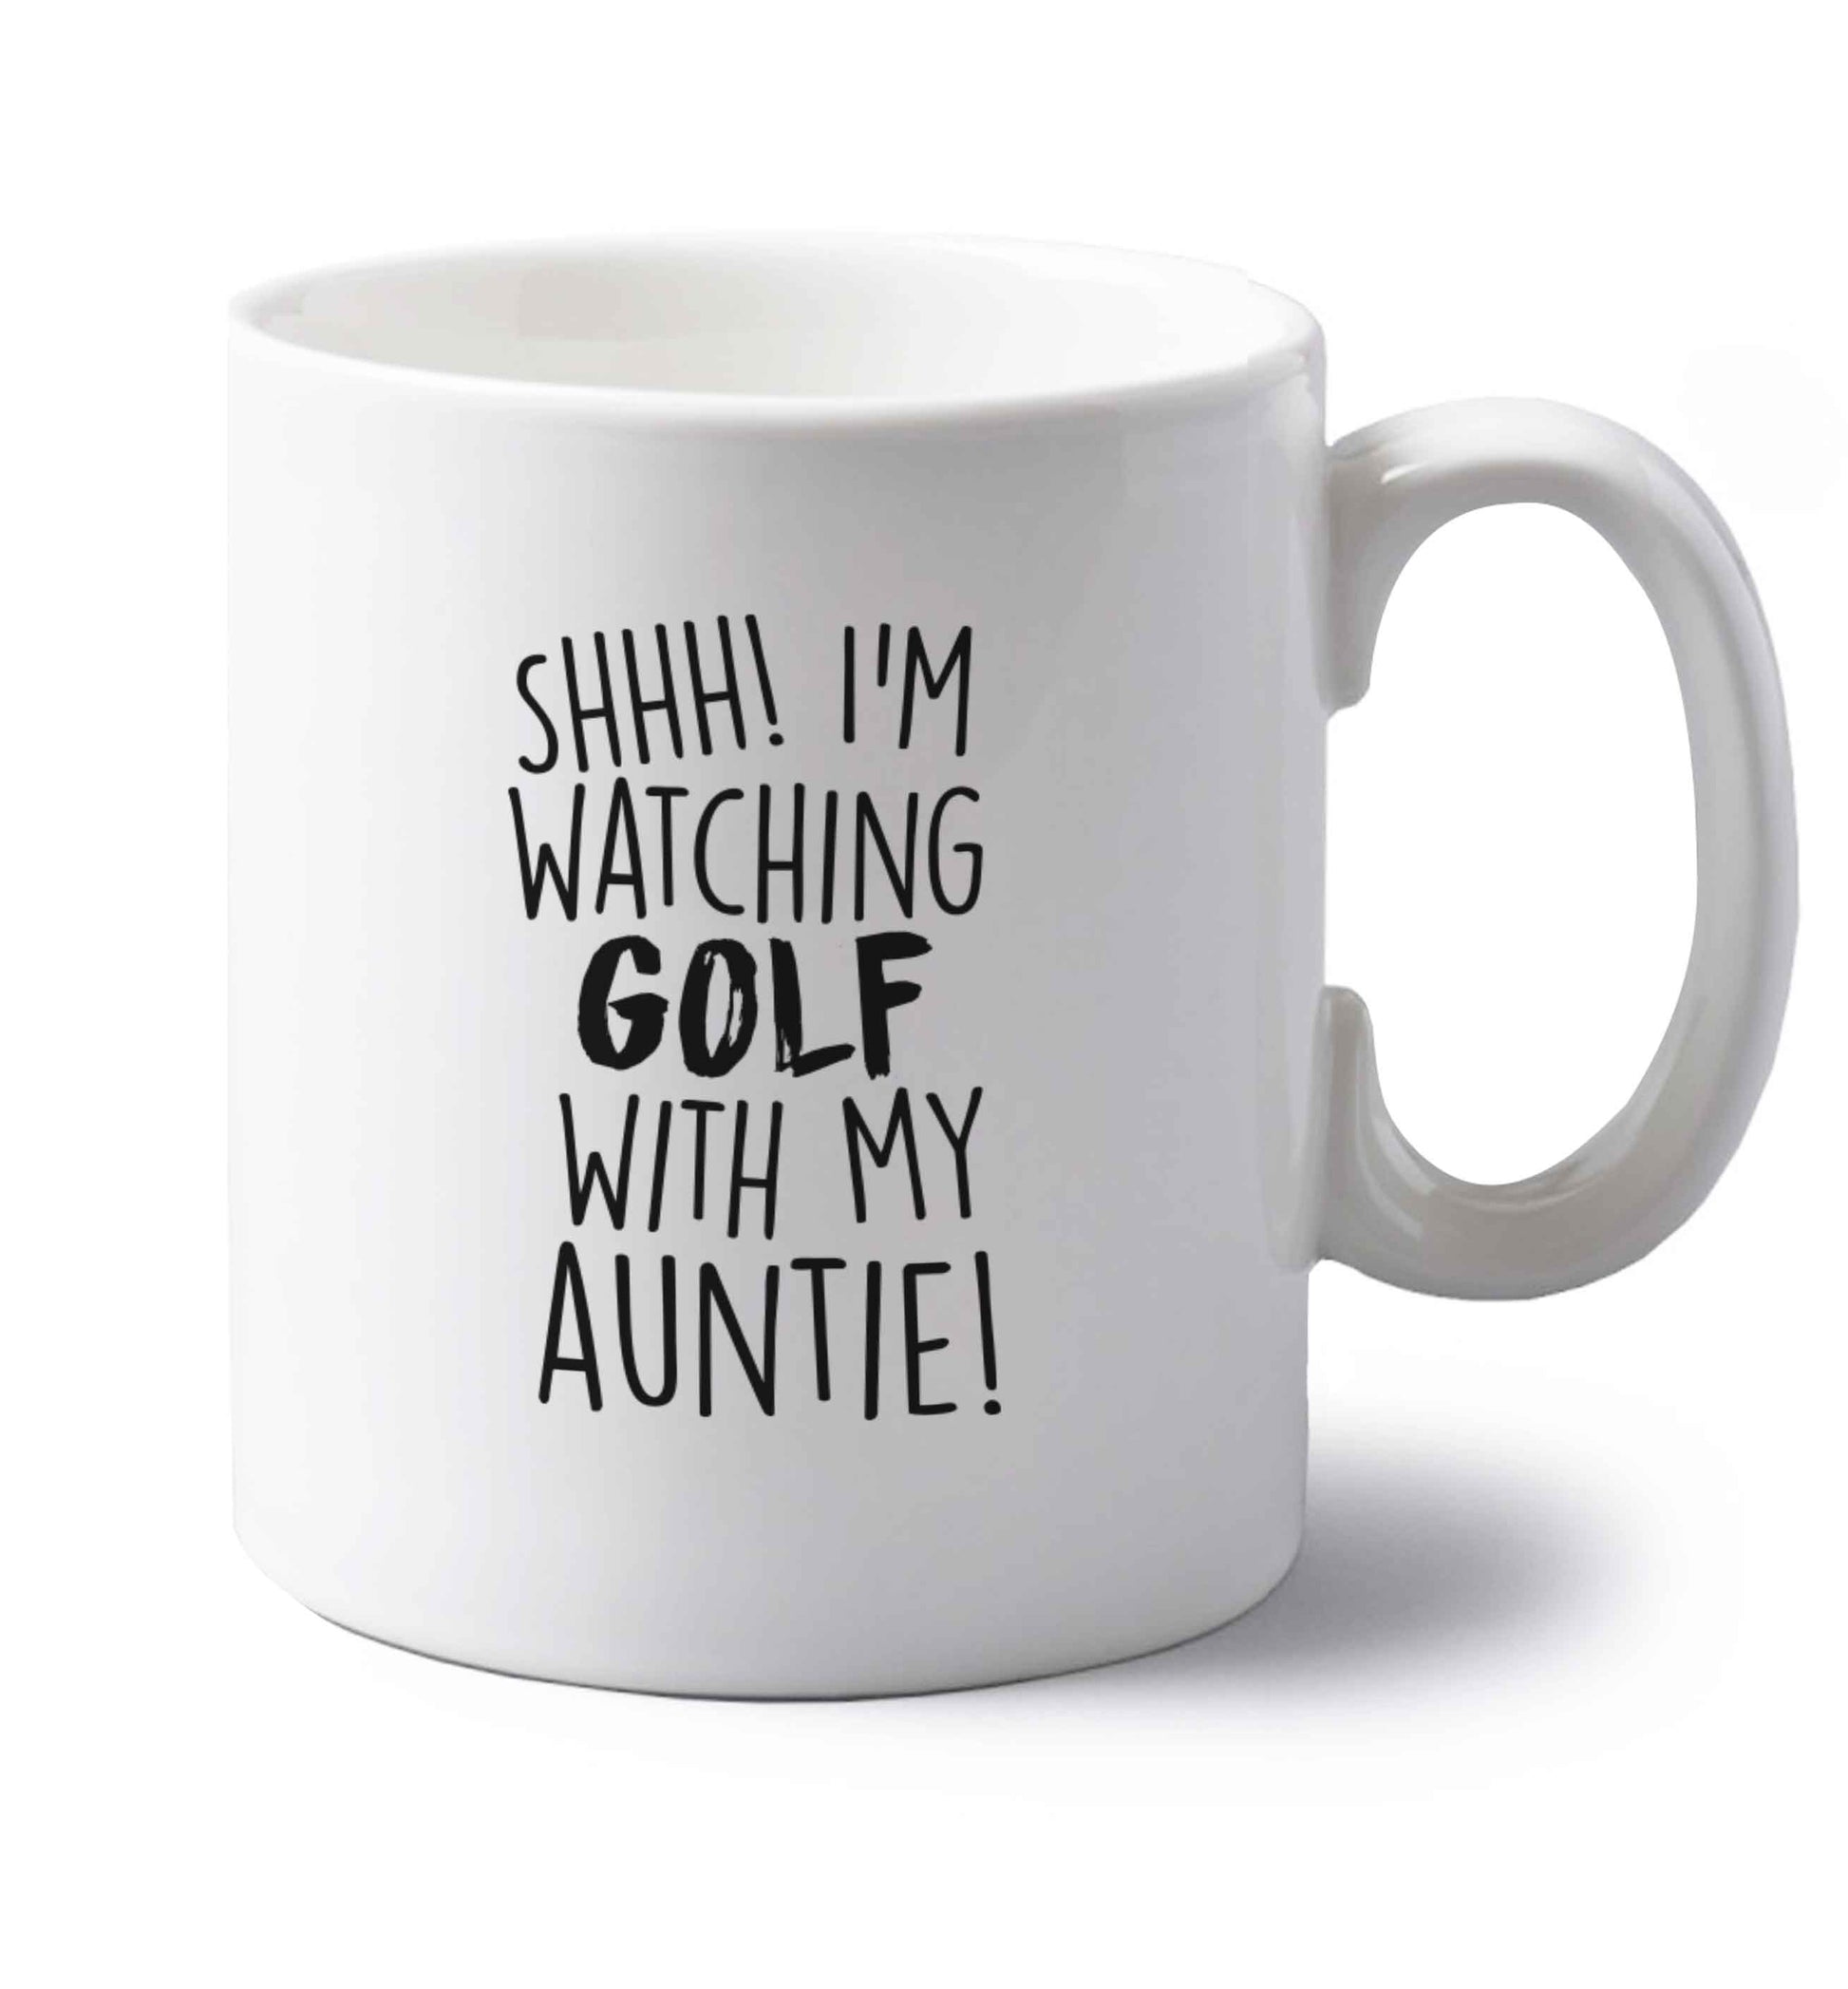 Shh I'm watching golf with my auntie left handed white ceramic mug 